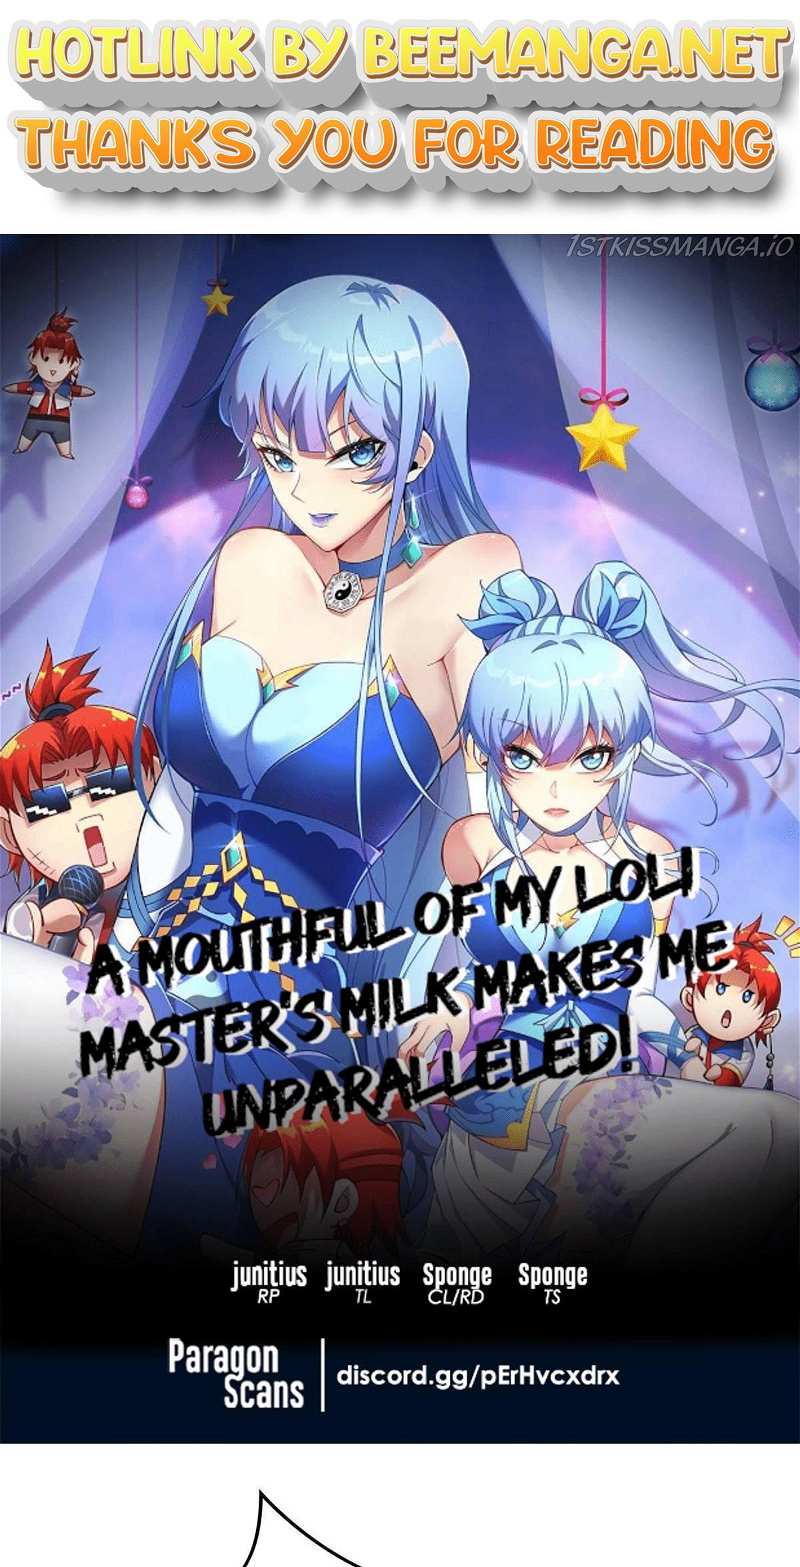 A Mouthful of My Loli Master’s Milk Makes Me Unparalleled Chapter 19 - page 1